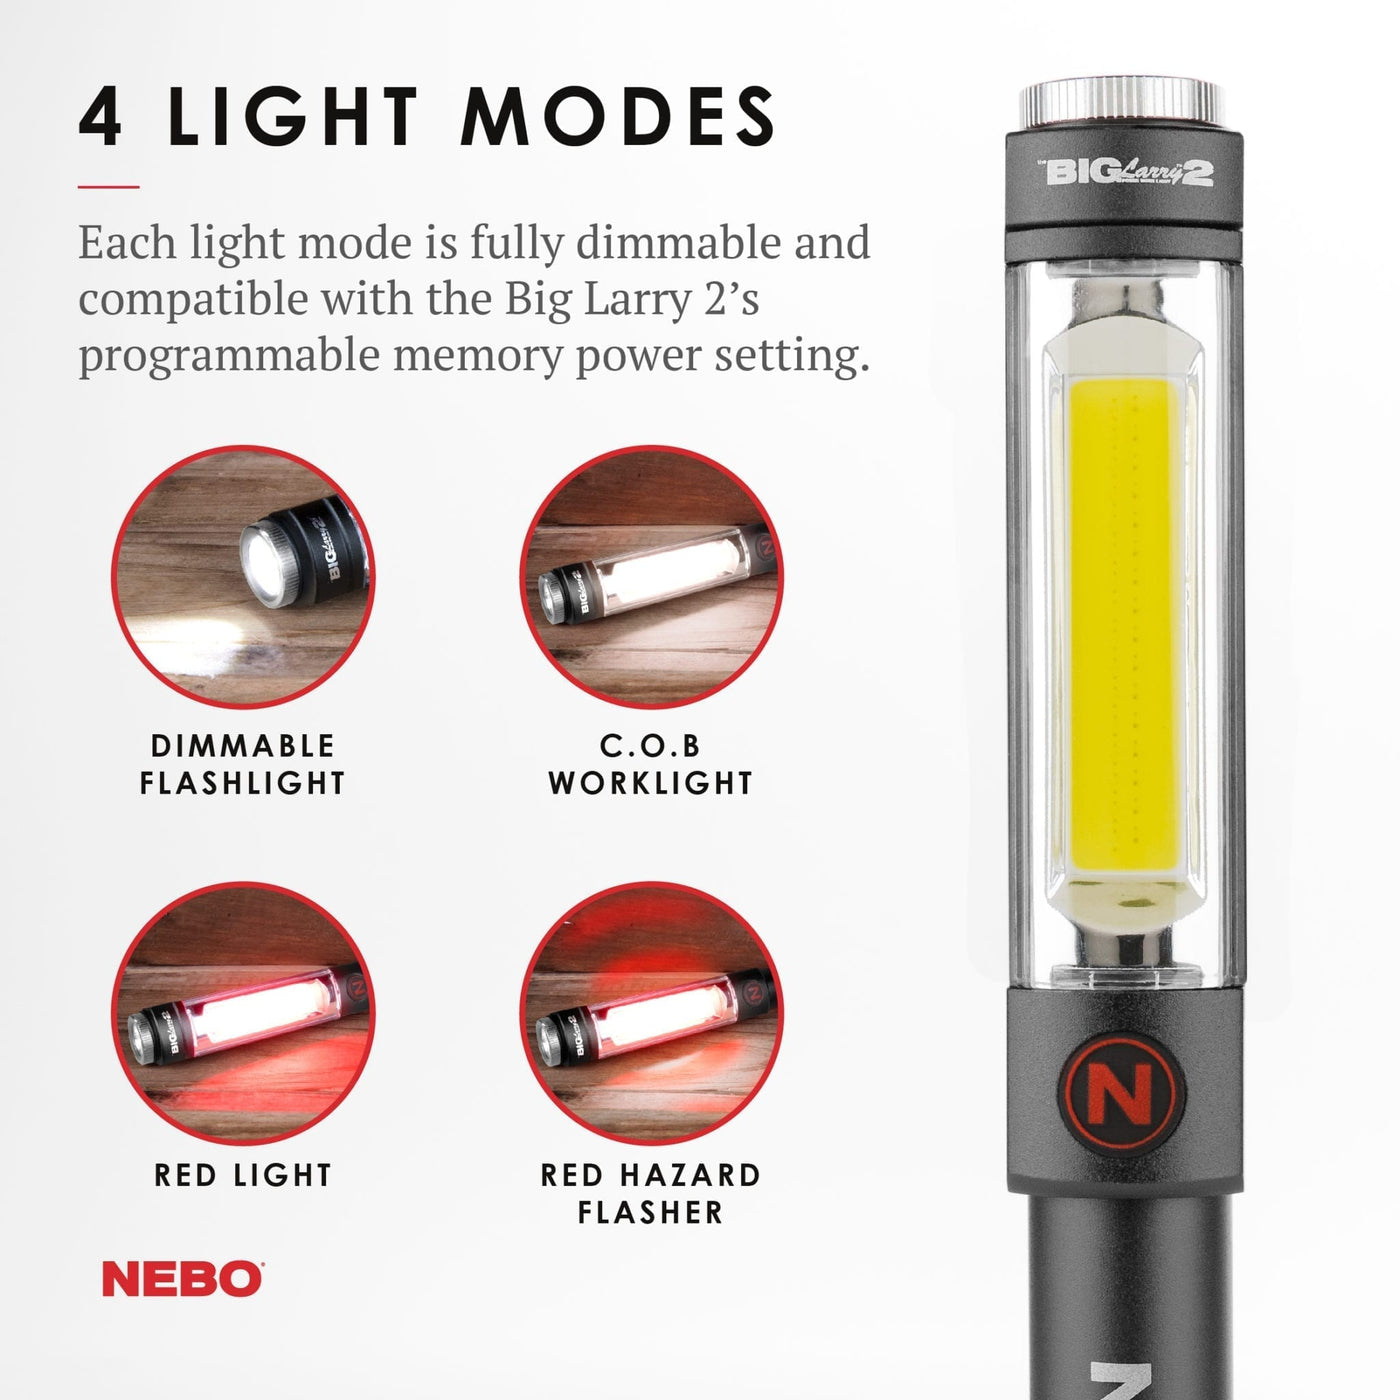 At Nebo Tools, we continually innovate so that we can offer the highest quality LED lighting products at the best price. The Big Larry™ 2 outputs 500 lumens with the COB work light and 200 lumens from the top flashlight which includes 4 light modes.  The red COB light is perfect for distress signalling or roadside emergencies. The steel clip and magnetic base provide convenient hands-free lighting options.